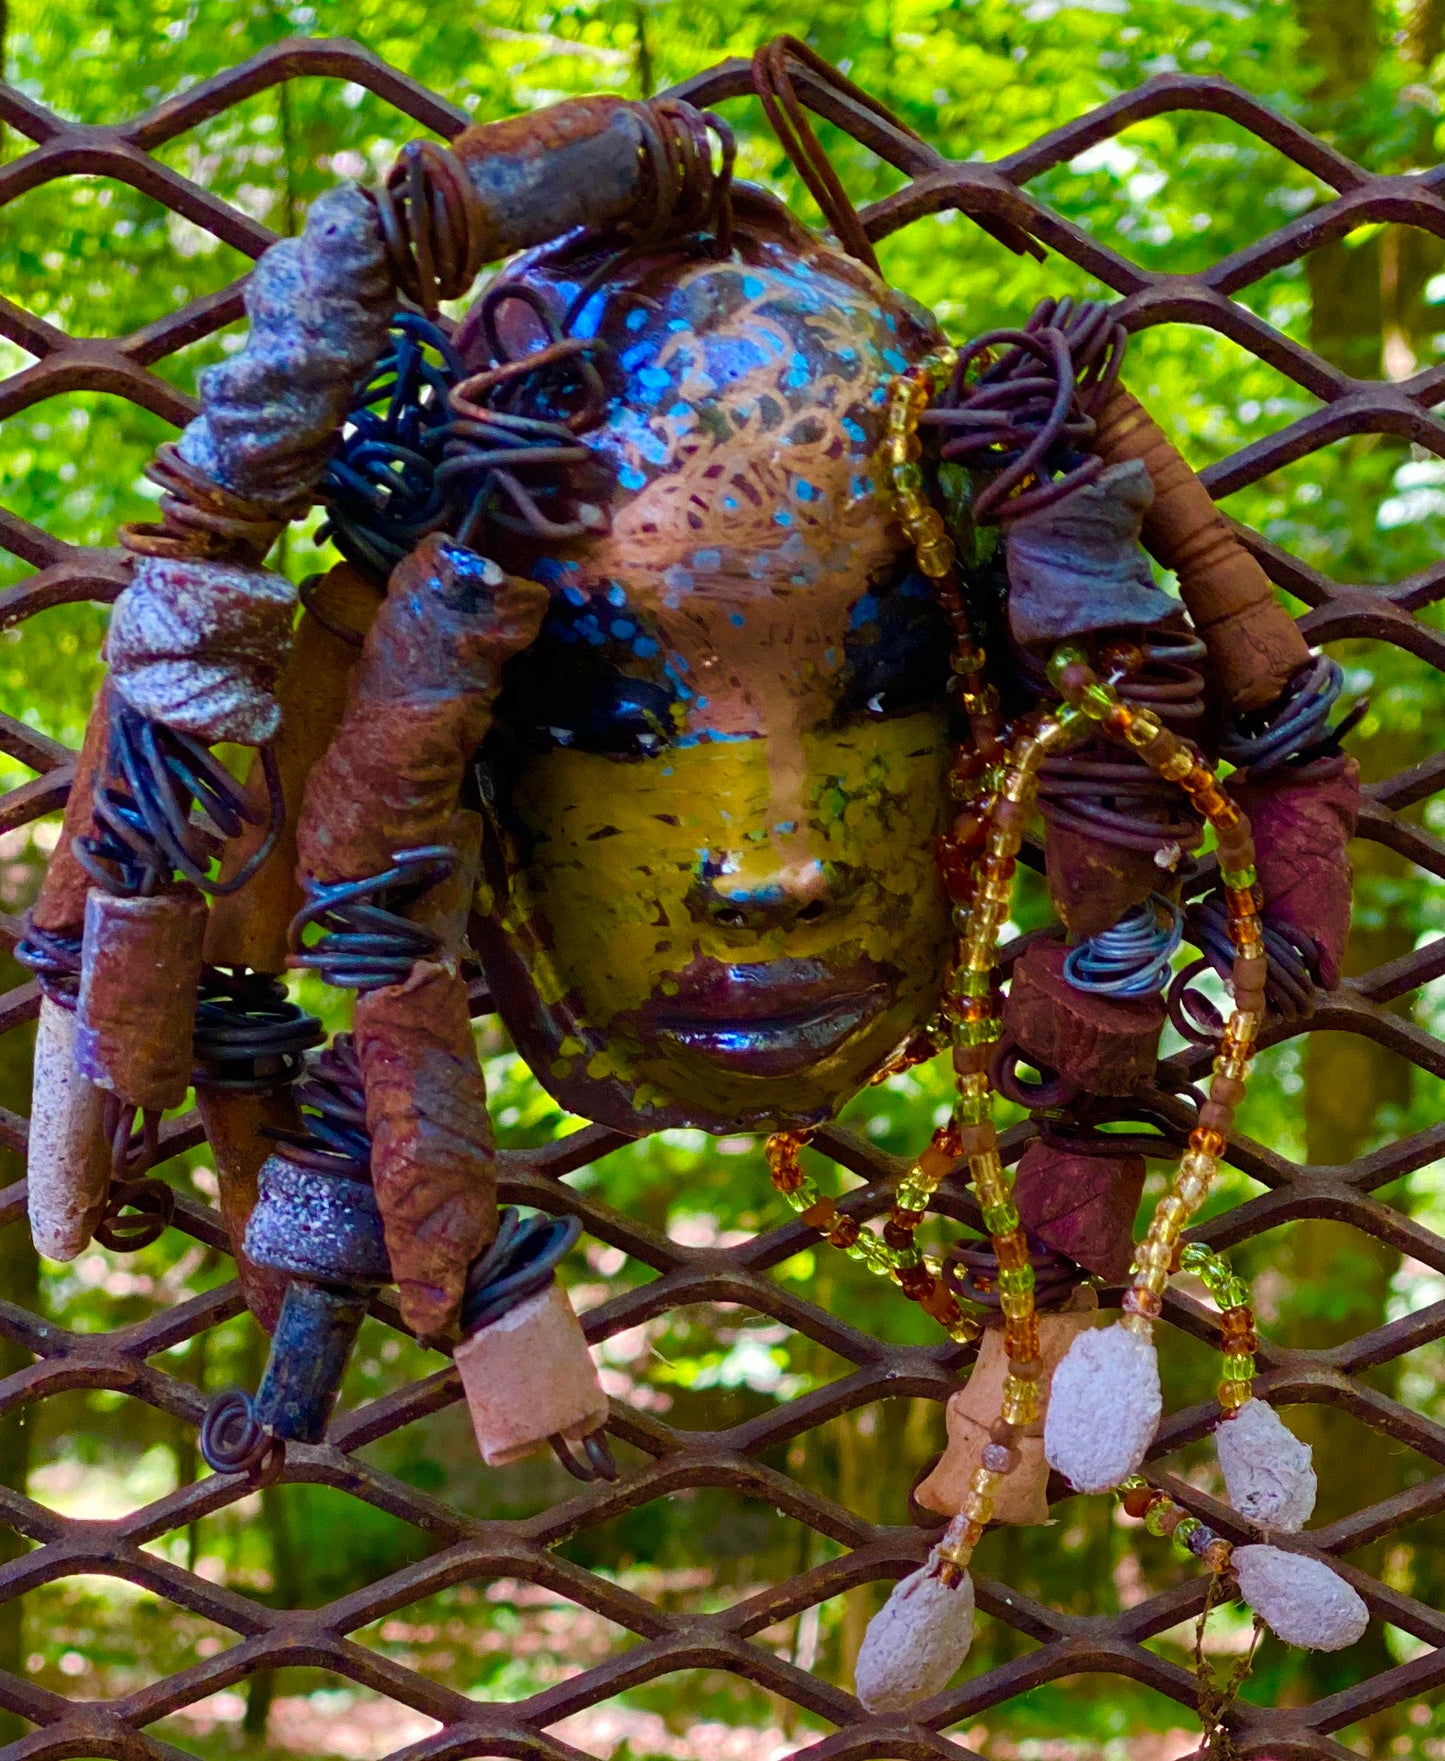 I started making mask soon after seeing authentic African artwork at the Smithsonian Museum of African Art. I was in total awe. Marali means she who listen  was inspired by my visit there.  Marali has a two tone  metallic blue copper gold complexion. She is 7" x 5" and weighs 14 ozs. Marali has  over 20 handmade raku fired beads. She has over 50 mini amber bead twisted as hair. Marali has over 6 feet of  copper coiled 16 gauge wire hair.